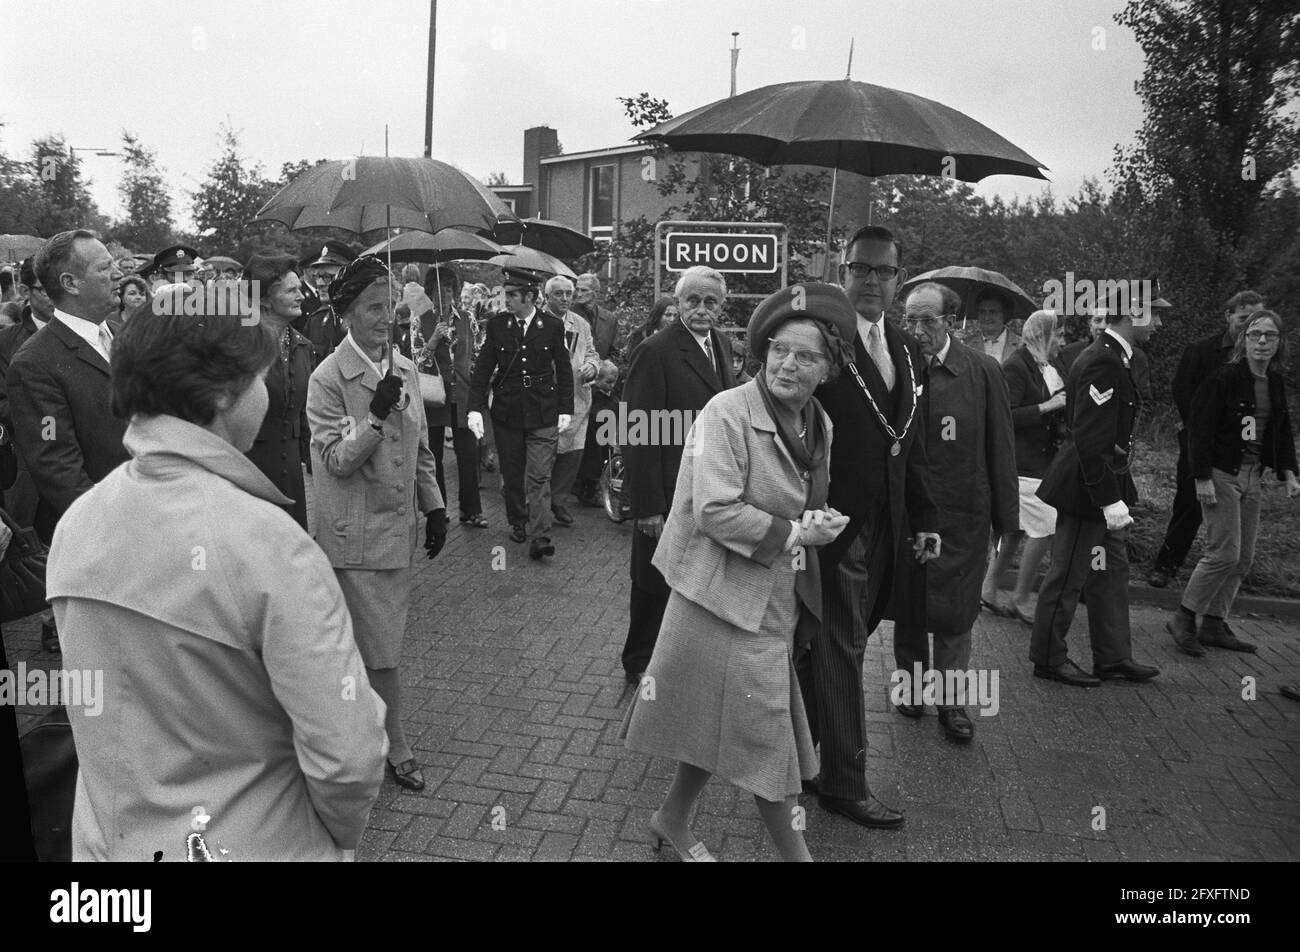 Queen Juliana visits the municipalities of Rhoon, Poortugaal and Maassluis ( South Holland ); behind the queen Commissioner Klaasesz, September 24, 1971, visits, mayors, queens, umbrellas, The Netherlands, 20th century press agency photo, news to remember, documentary, historic photography 1945-1990, visual stories, human history of the Twentieth Century, capturing moments in time Stock Photo